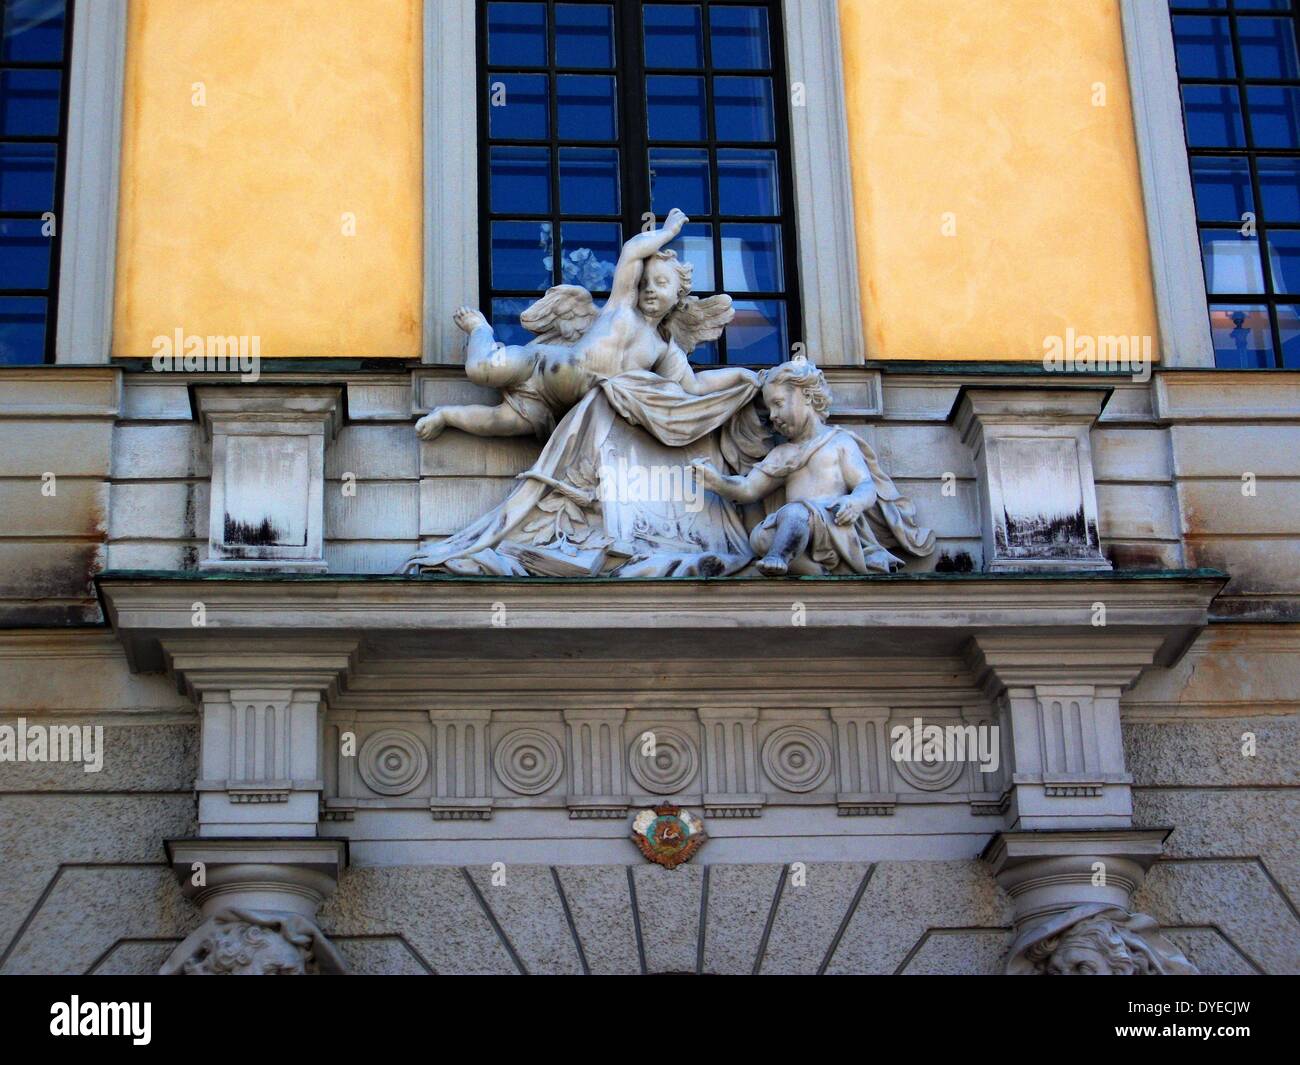 Sculptural detail at the Royal Palace, Stockholm, Sweden. 2012 Stock Photo